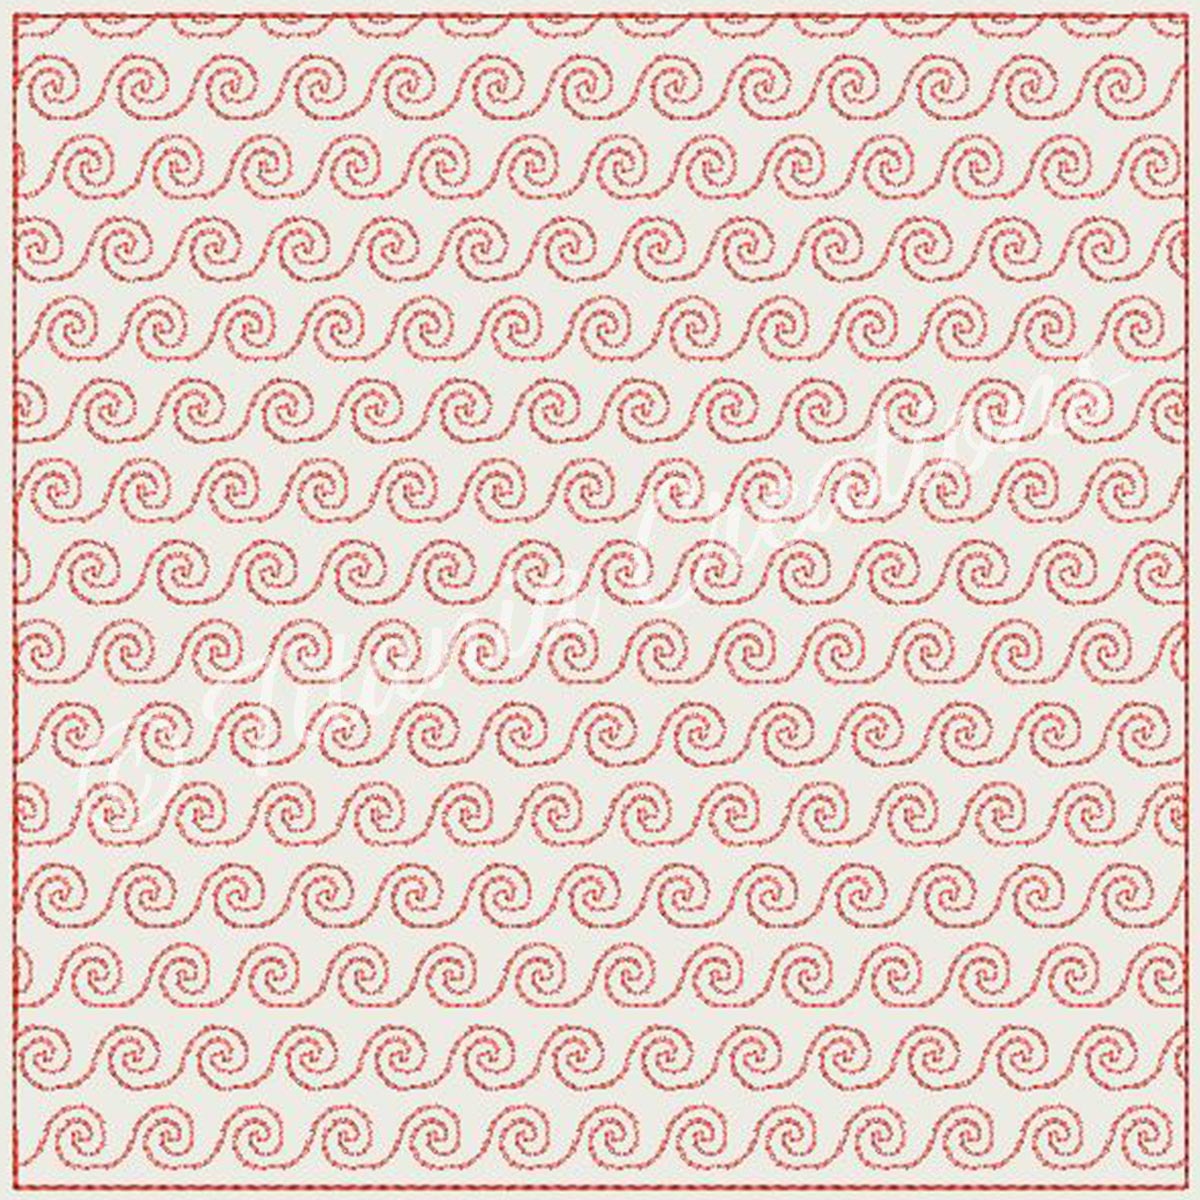 Swirl Quilt Blocks 9 Sizes Included